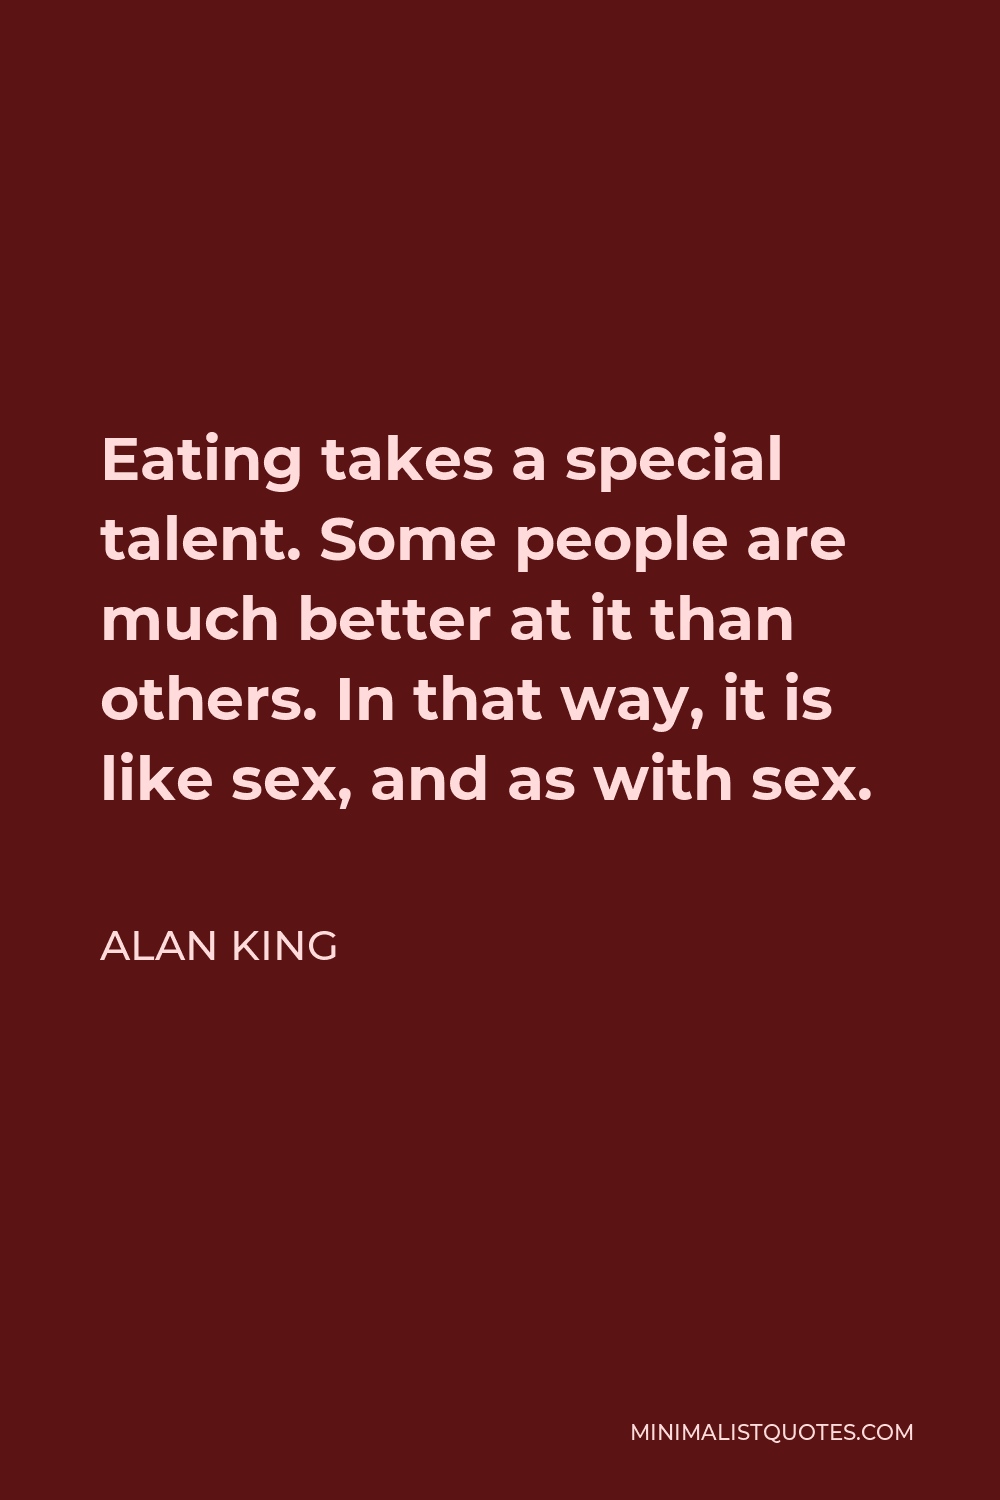 Alan King Quote - Eating takes a special talent. Some people are much better at it than others. In that way, it is like sex, and as with sex.